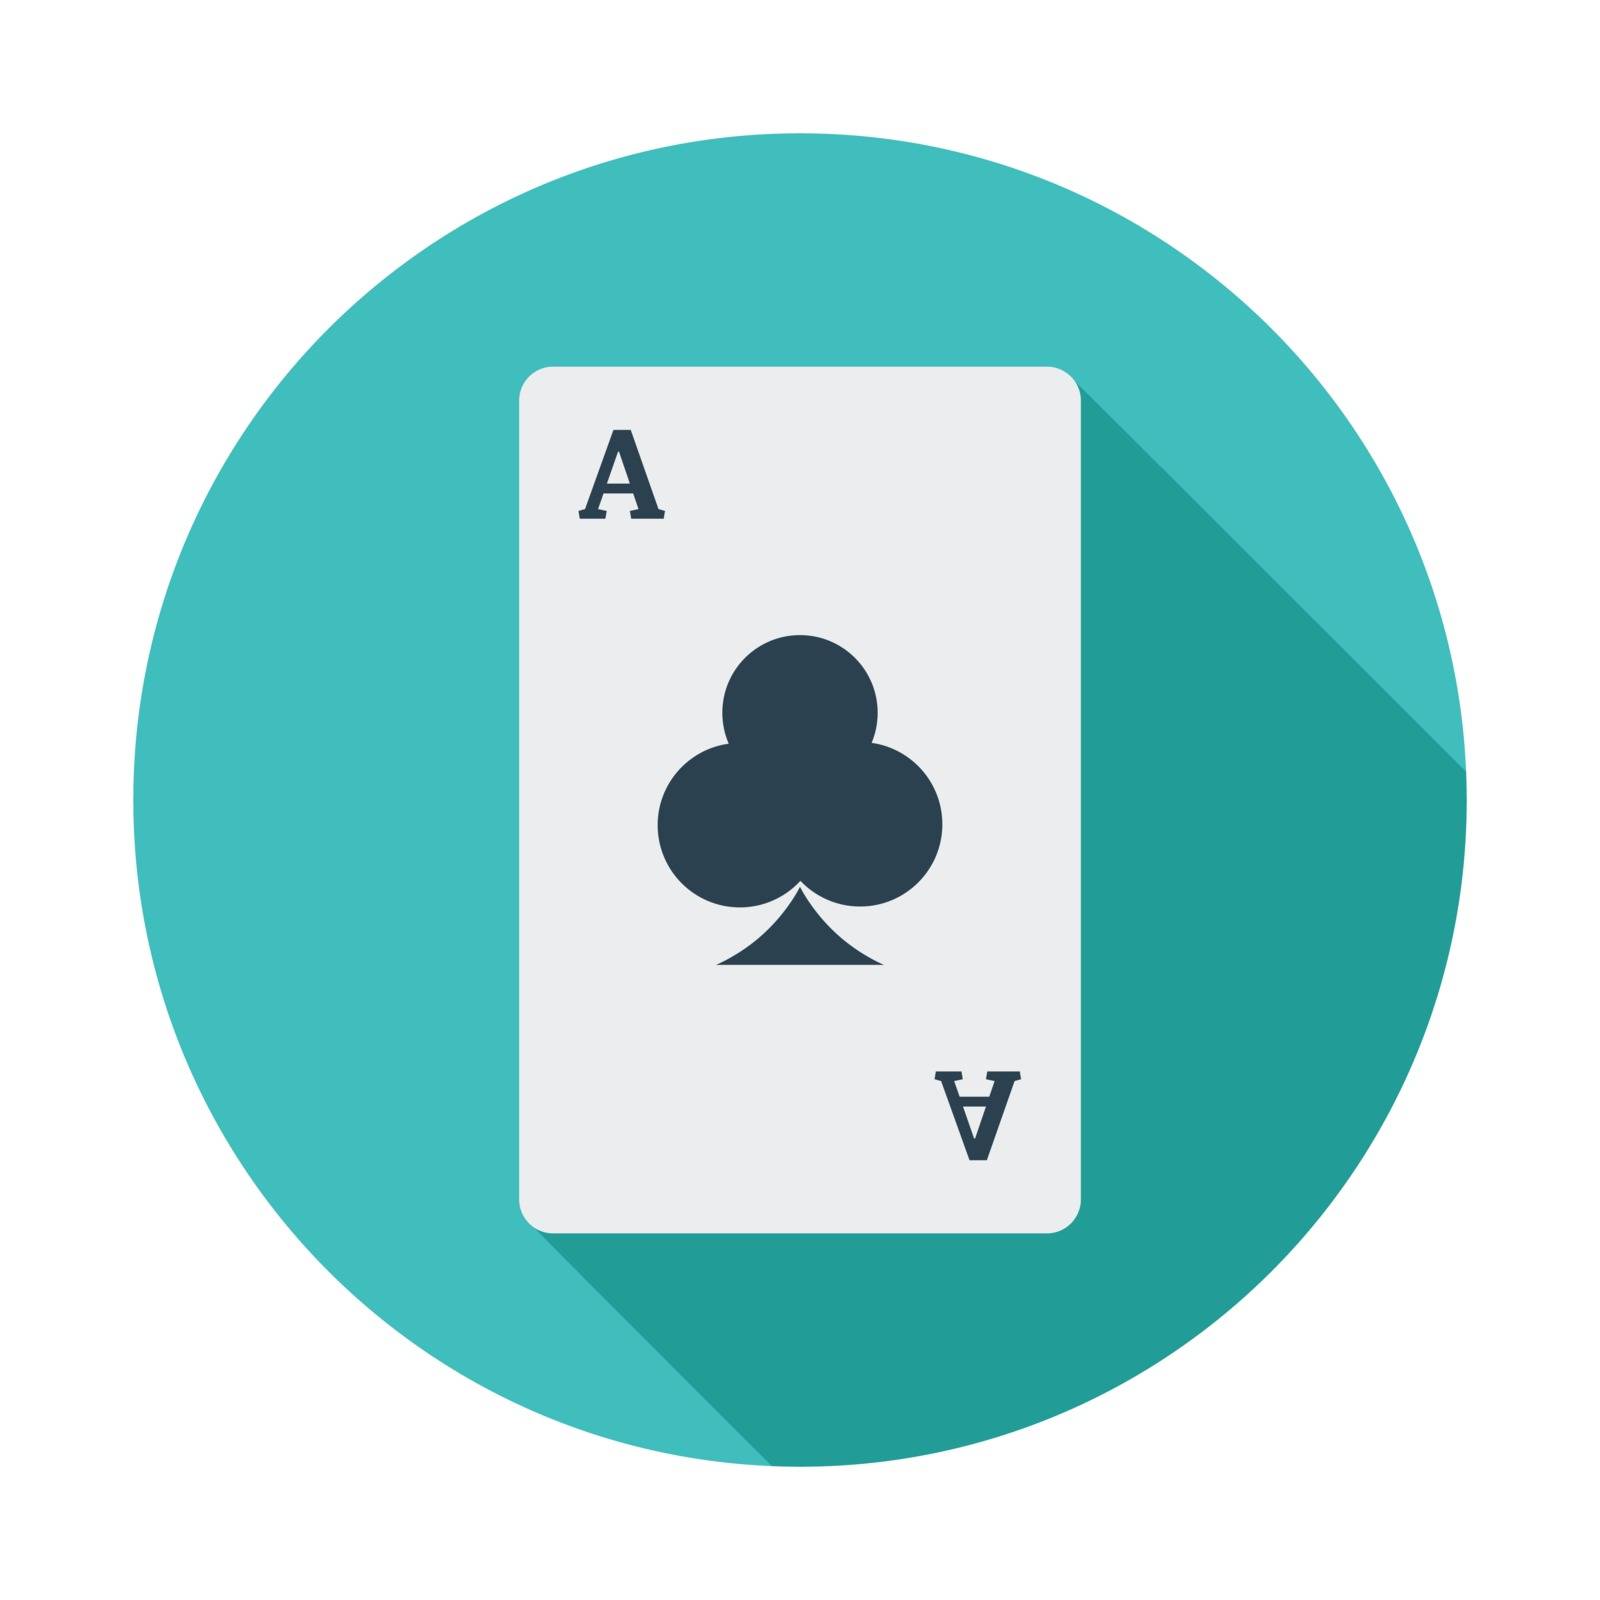 Play card. Flat vector icon for mobile and web applications. Vector illustration.